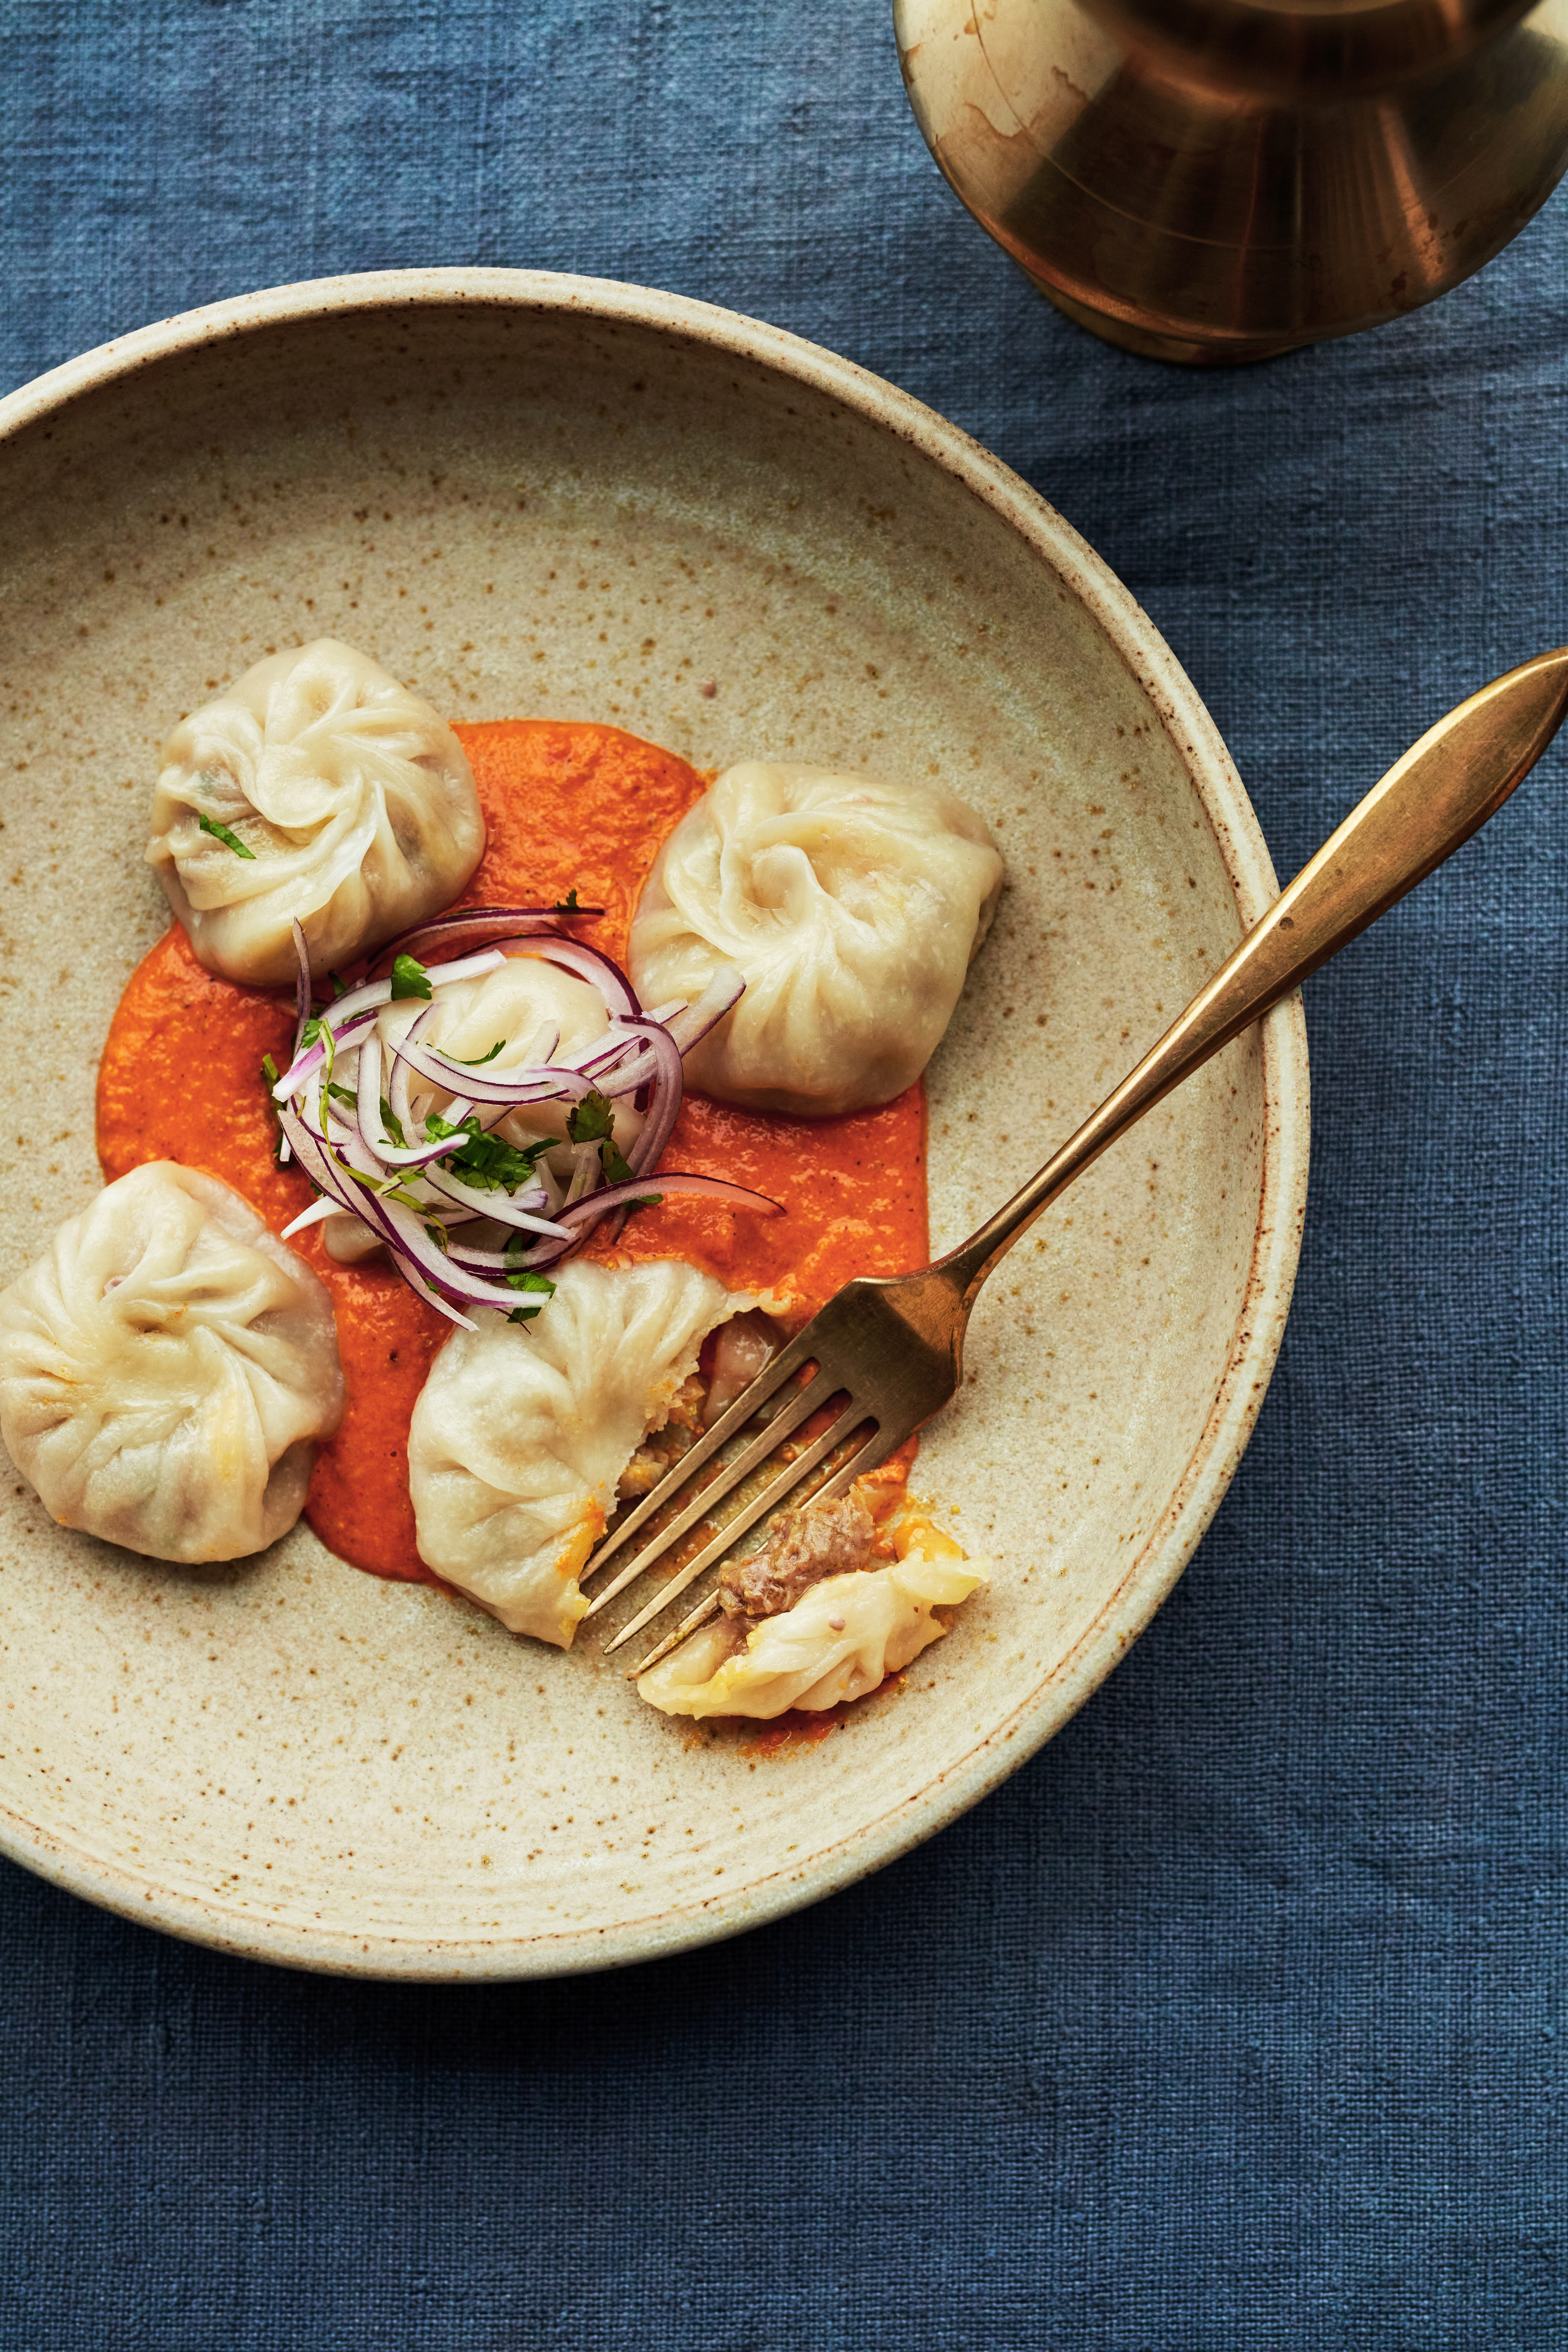 Kukhura ko momo - Steamed chicken momos with ginger &amp; chilli with a tomato sesame chutney